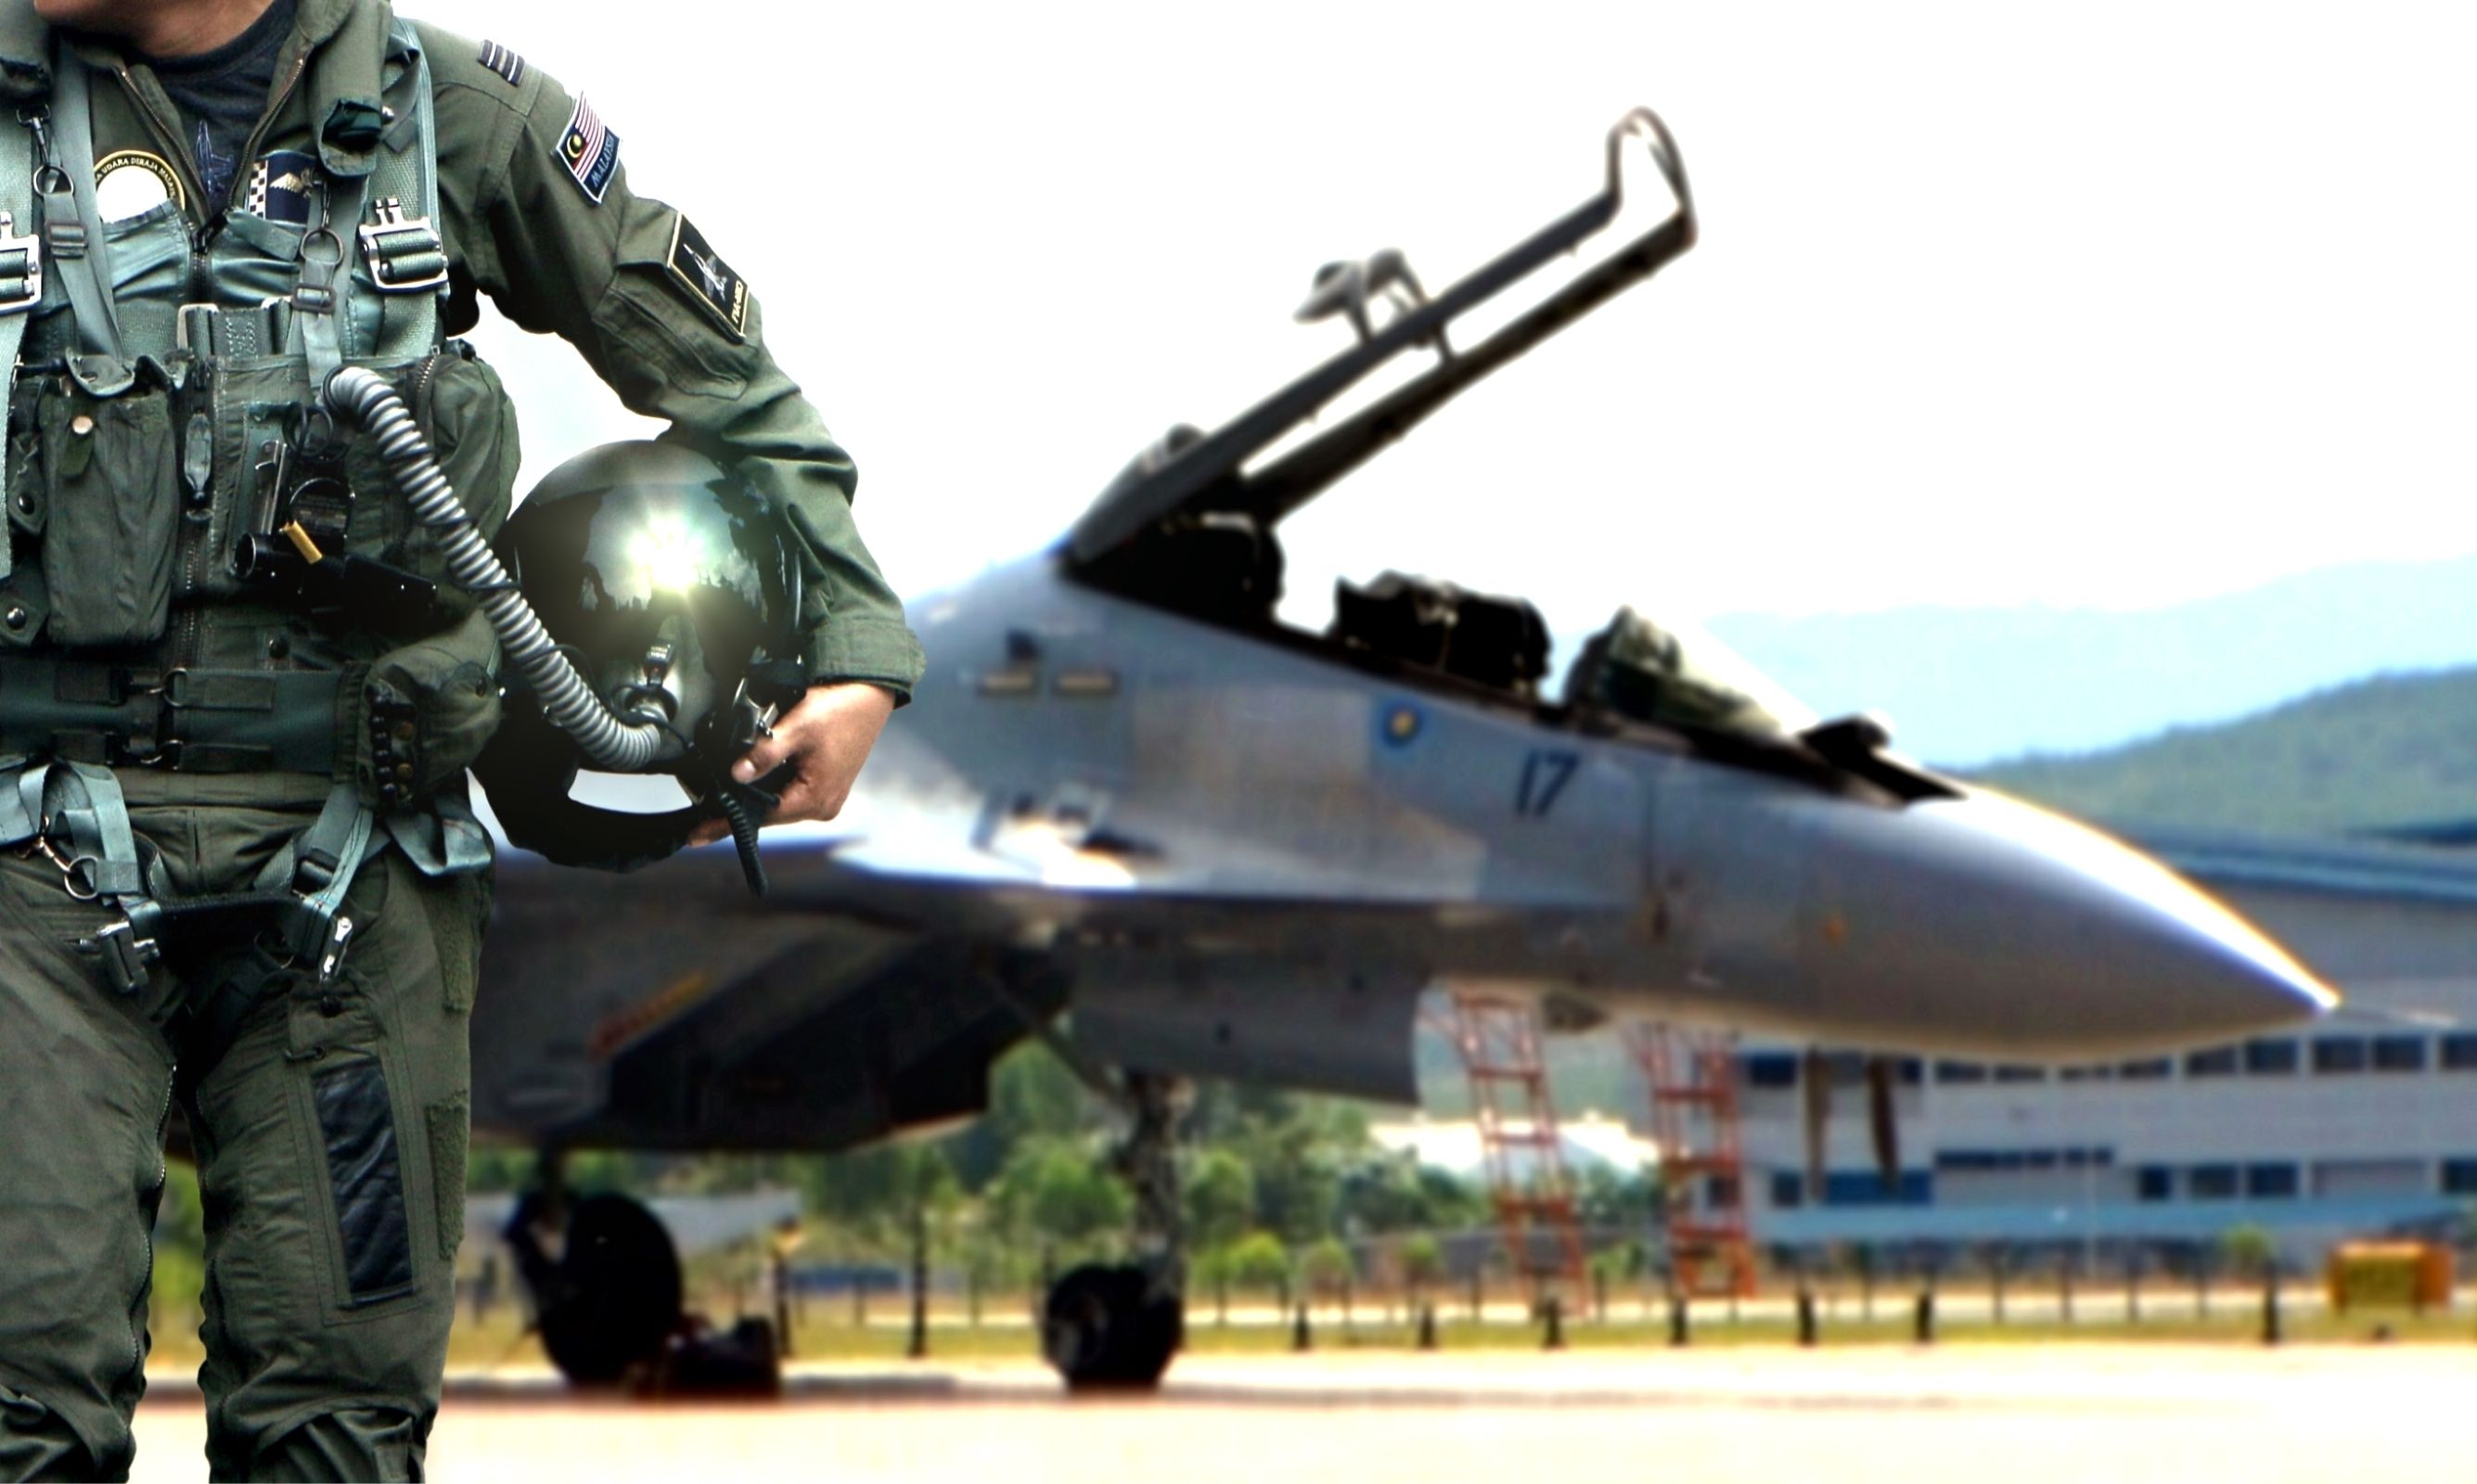 A military pilot walks away from their fighter jet.